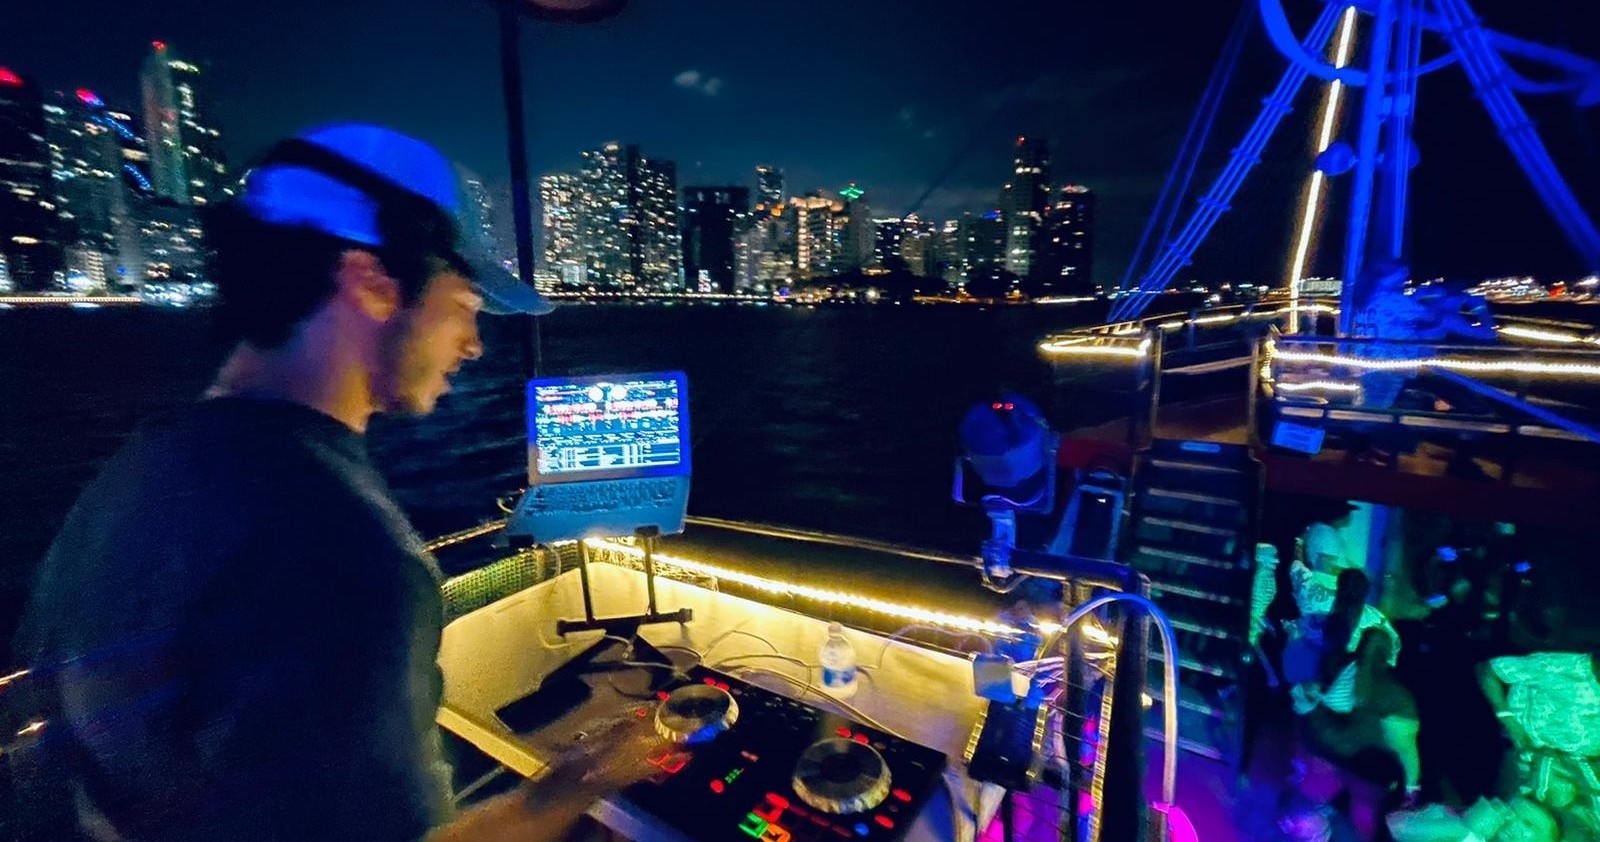 Nite Sea Party Cruise - Accommodations in Miami